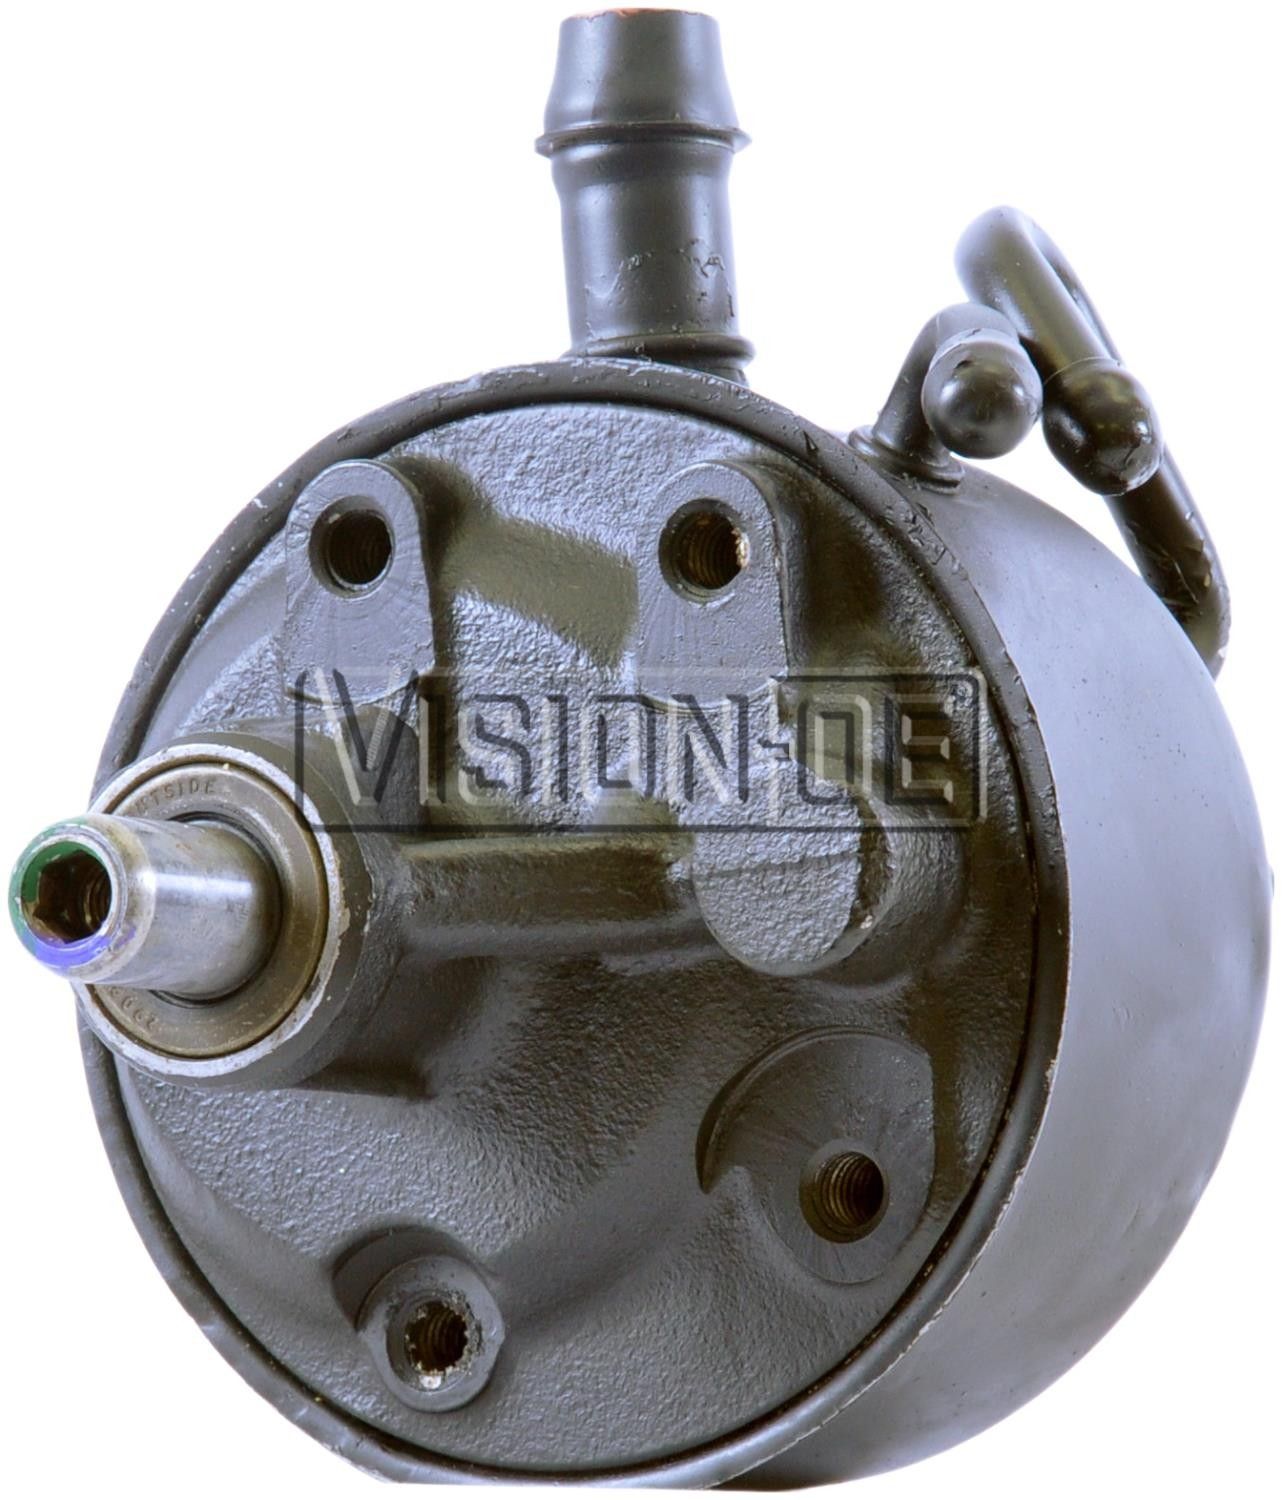 Details about   For 1981-1993 Chevrolet P30 Power Steering Pump 29493FS 1982 1983 1984 1985 1986